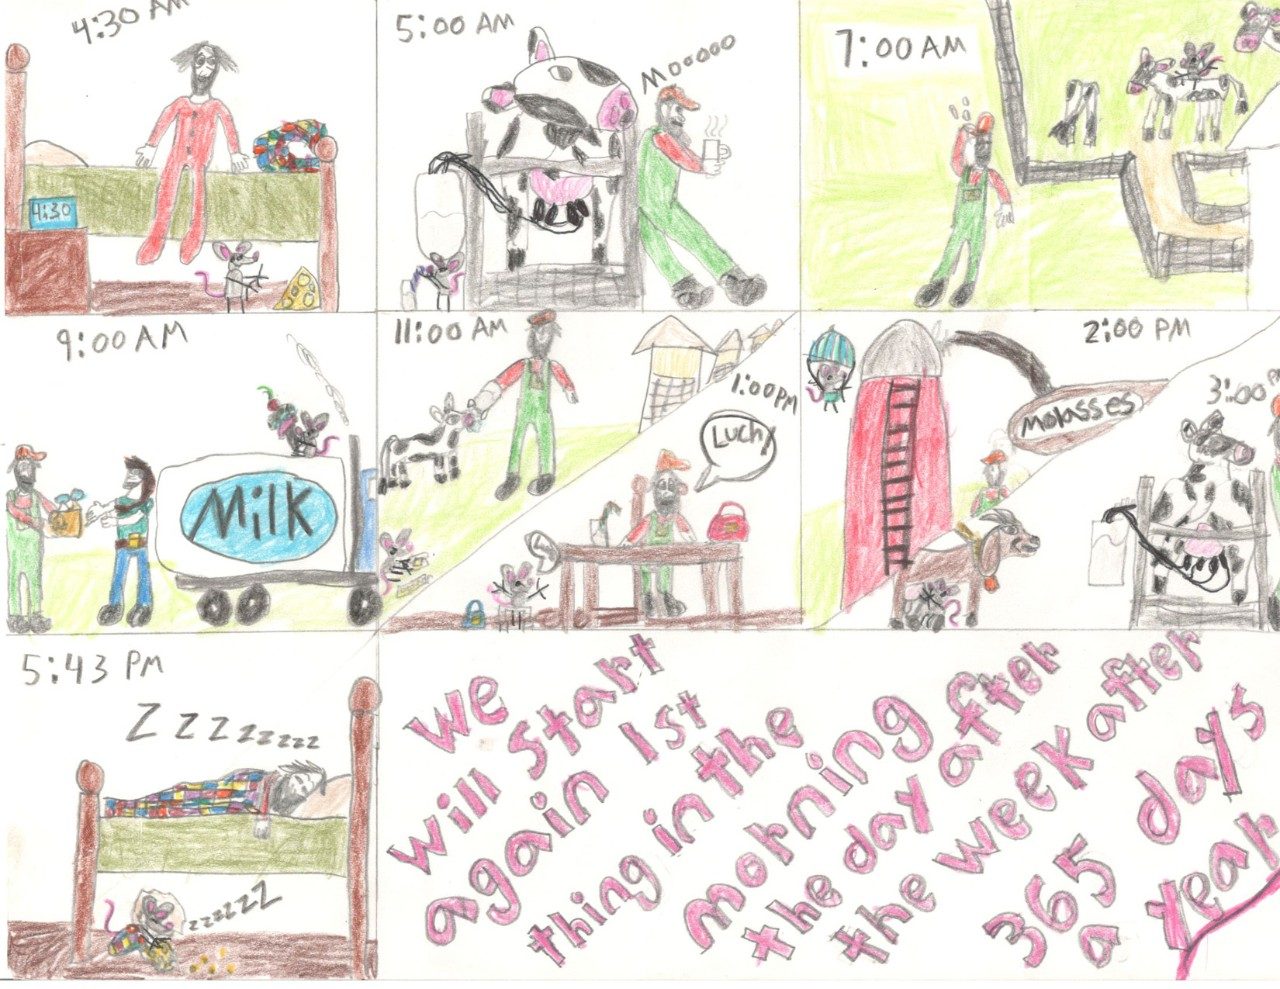 2023 June Dairy Month Poster Contest. Around the Dairy in 7 Days. Schylar Zollman, Botetourt County, Intermediate Division. Second Place.